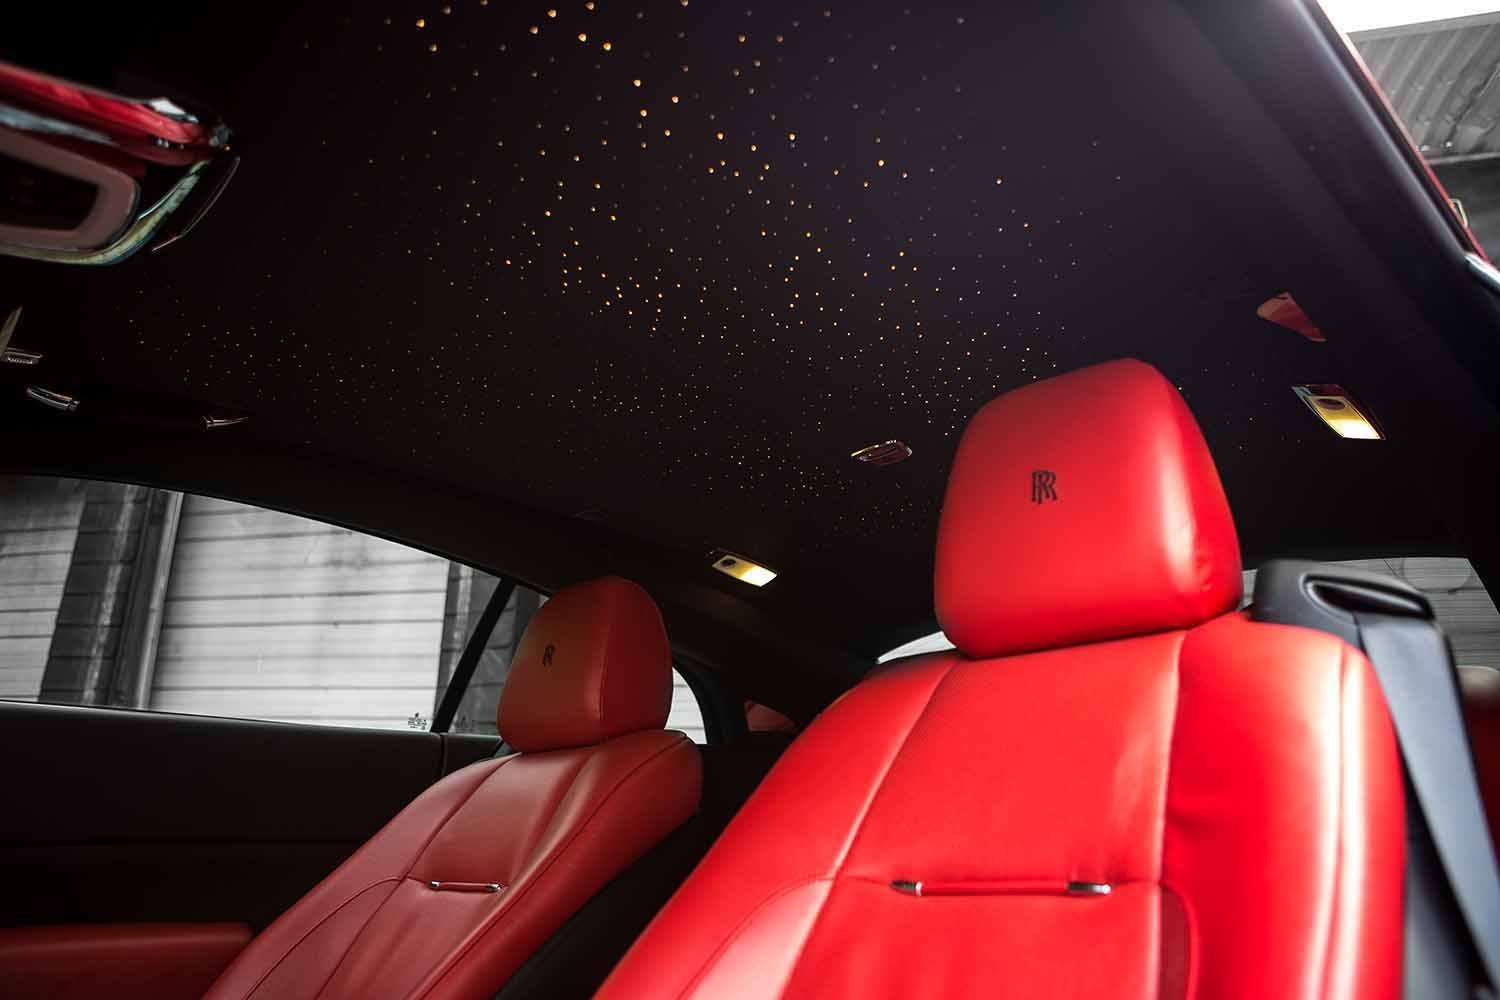 Aftermarket Seats in Red Rolls Royce Wraith - Photo by Forgiato